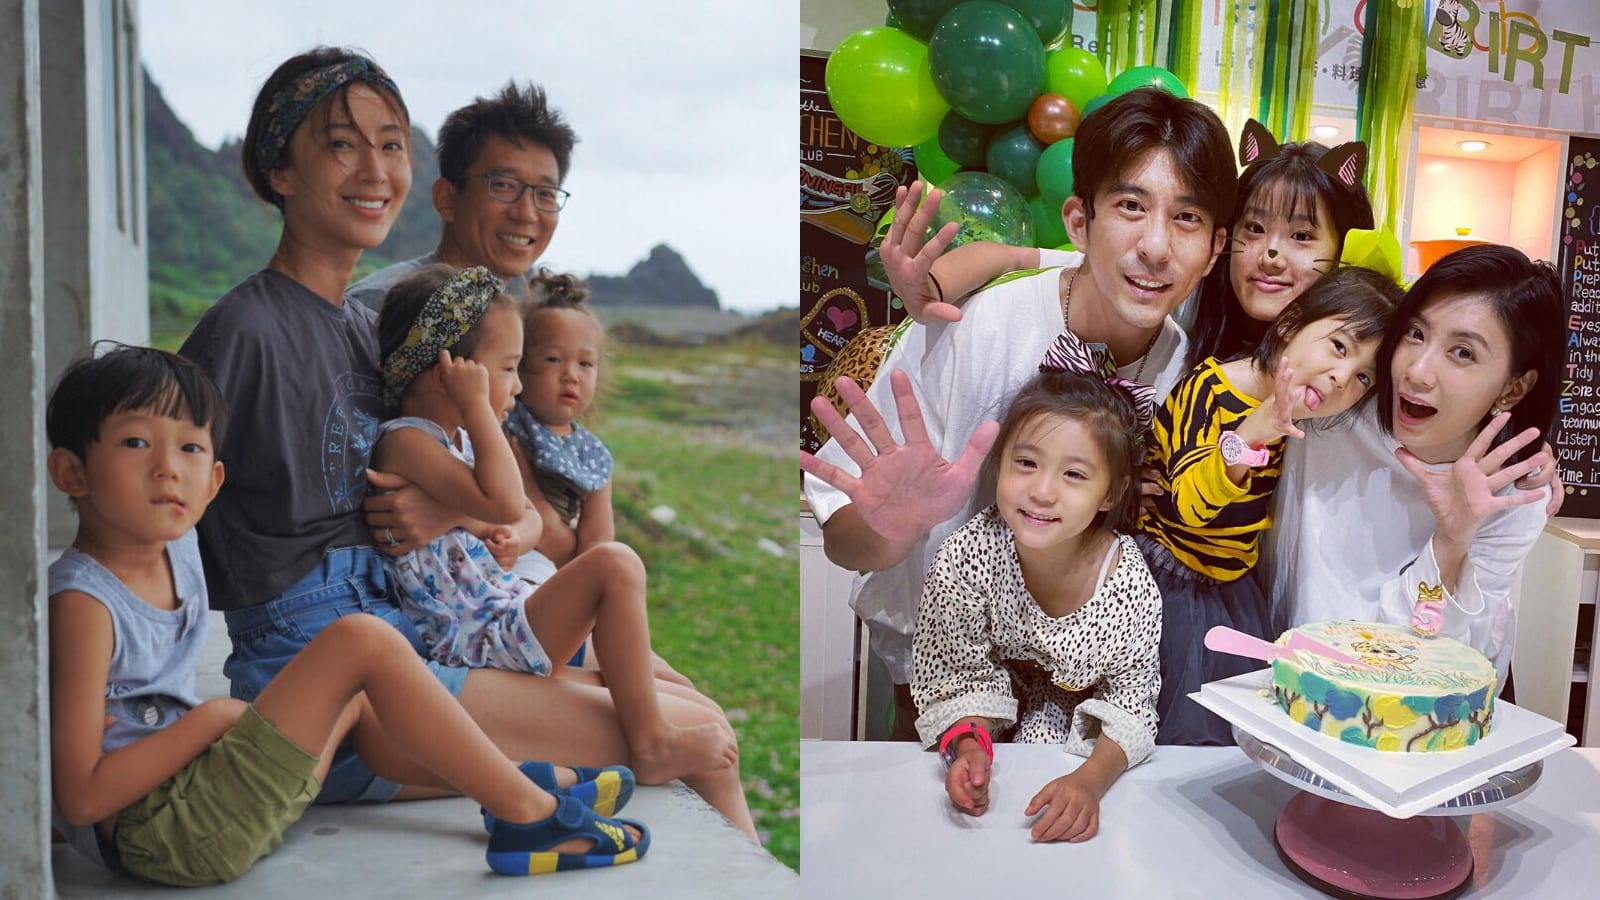 Sonia Sui & Alyssa Chia’s Kids Go To This Kindergarten That Reportedly Costs S$34K A Year